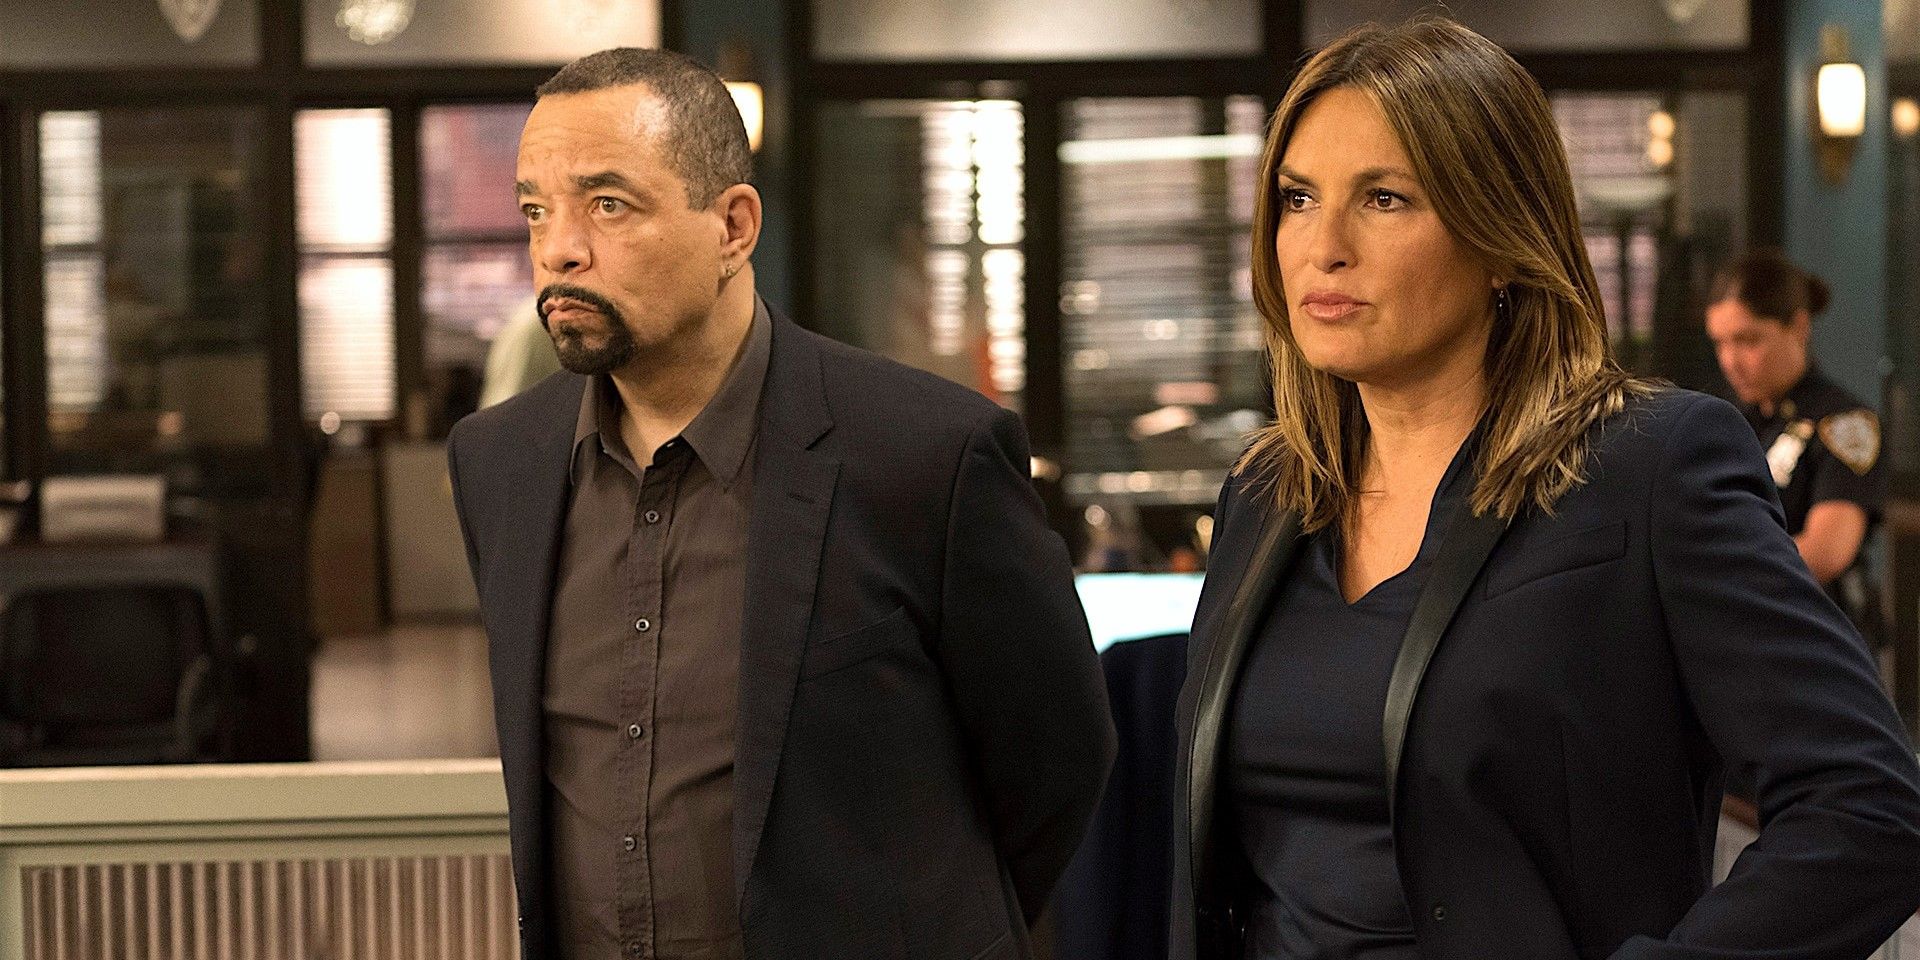 Ice T &amp; in Law &amp; Order SVU